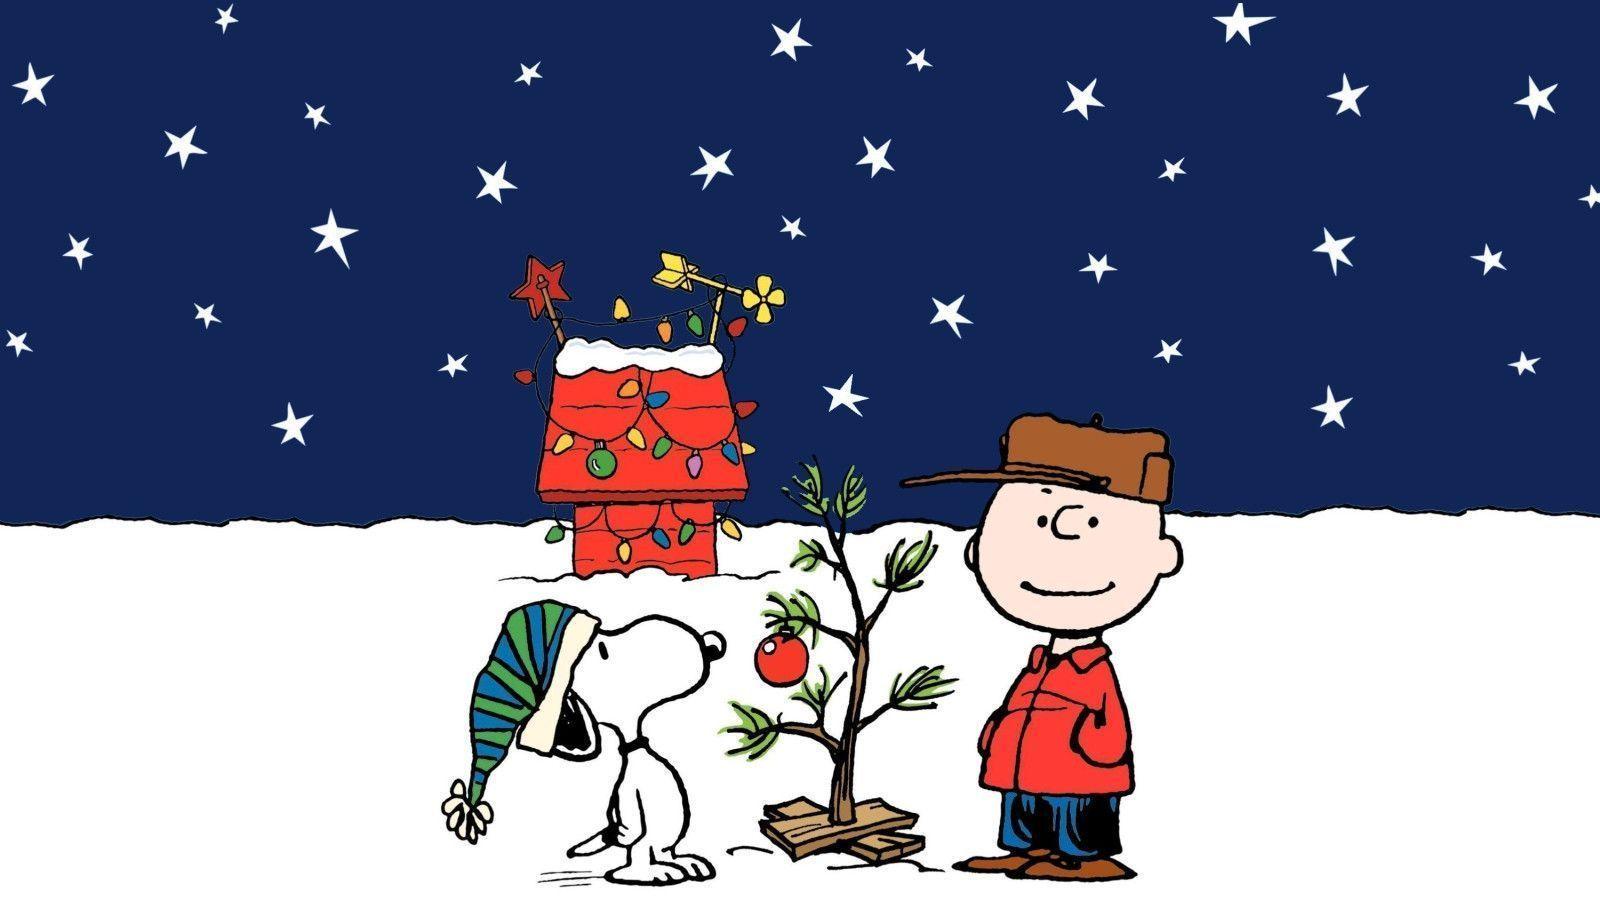 Download snoopy christmas HD background wallpaper with original